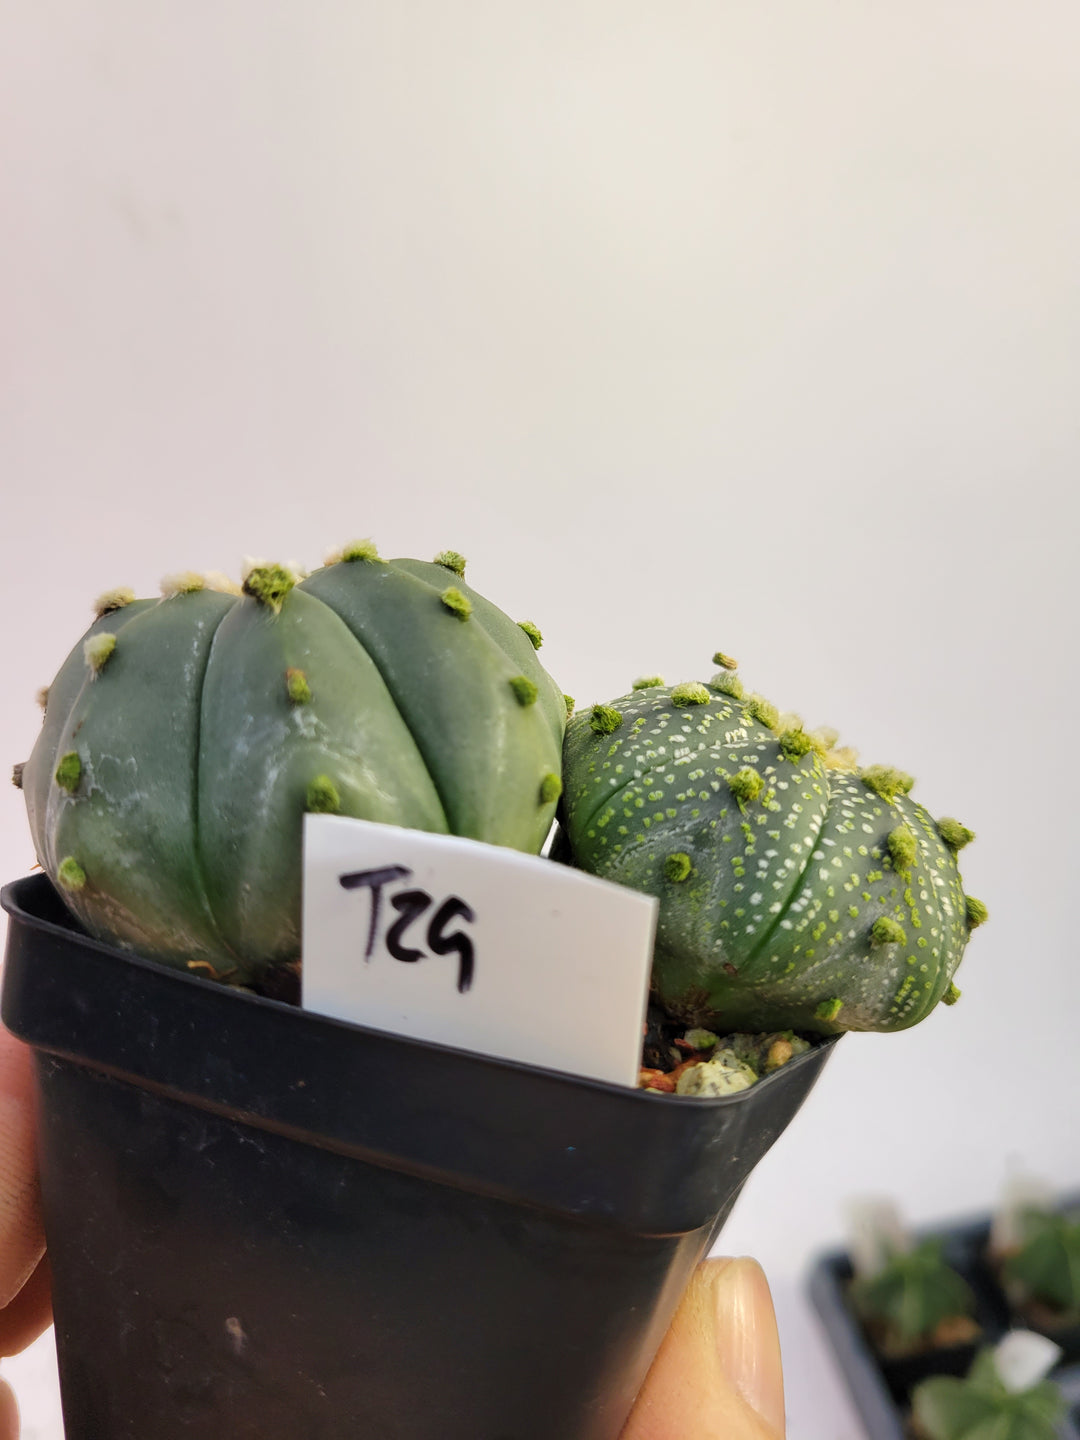 Astrophytum asterias cv. Superkabuto, rooted and established Deaw Cactus- Flowering Seed Grown#T29 - Nice Plants Good Pots